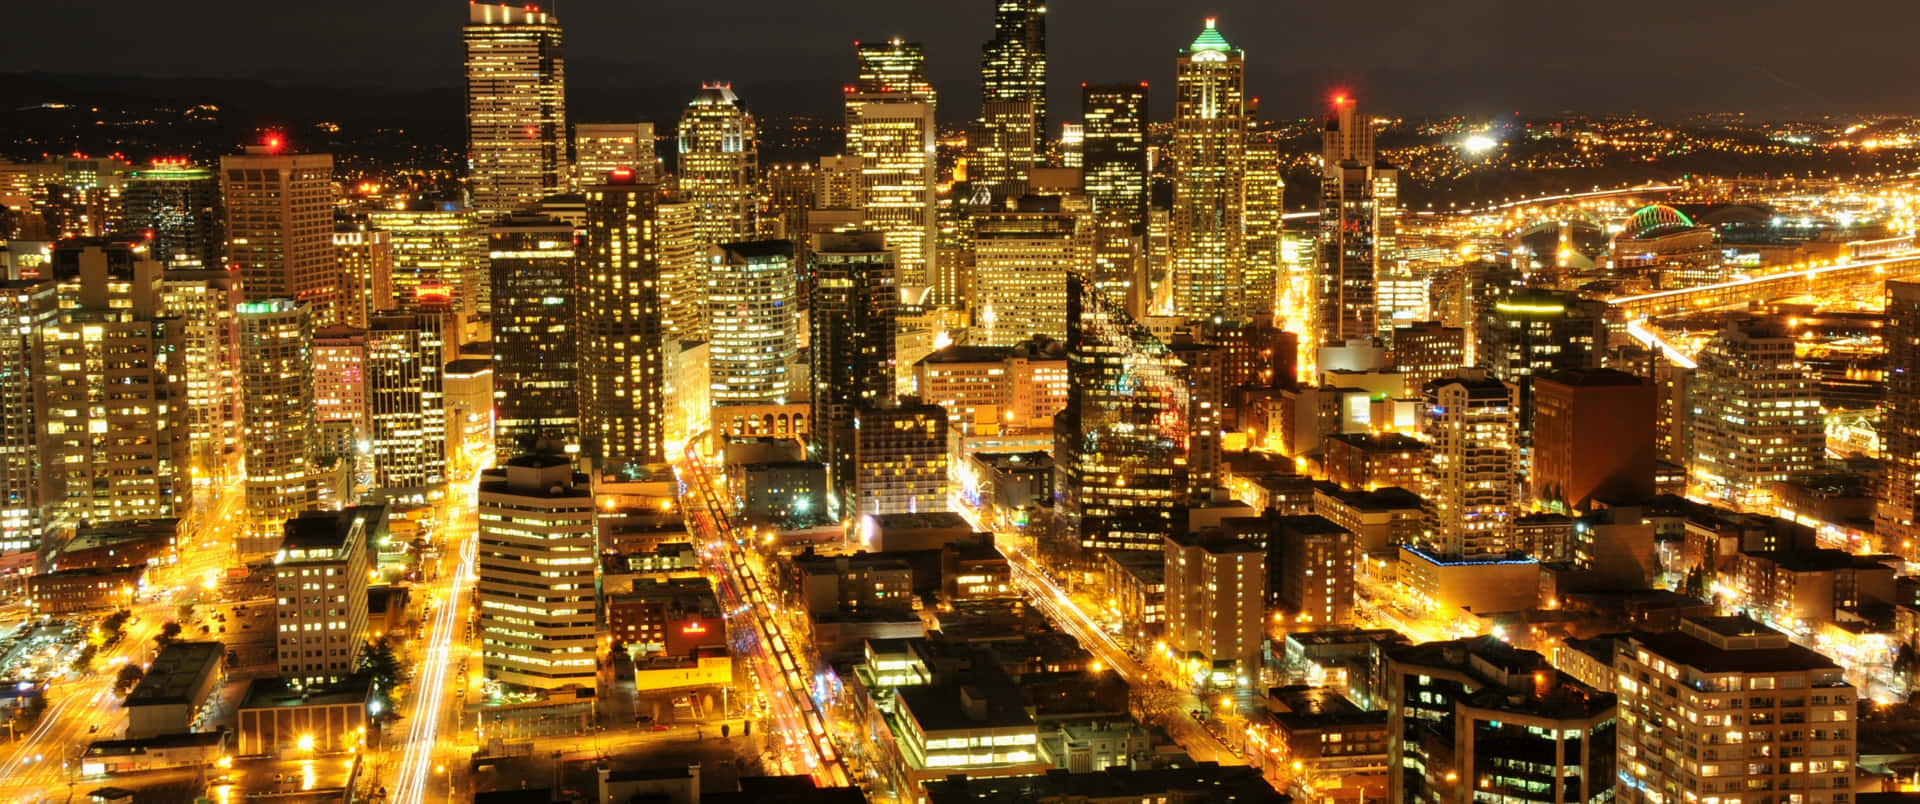 "A scenic view of the Seattle skyline at dusk"